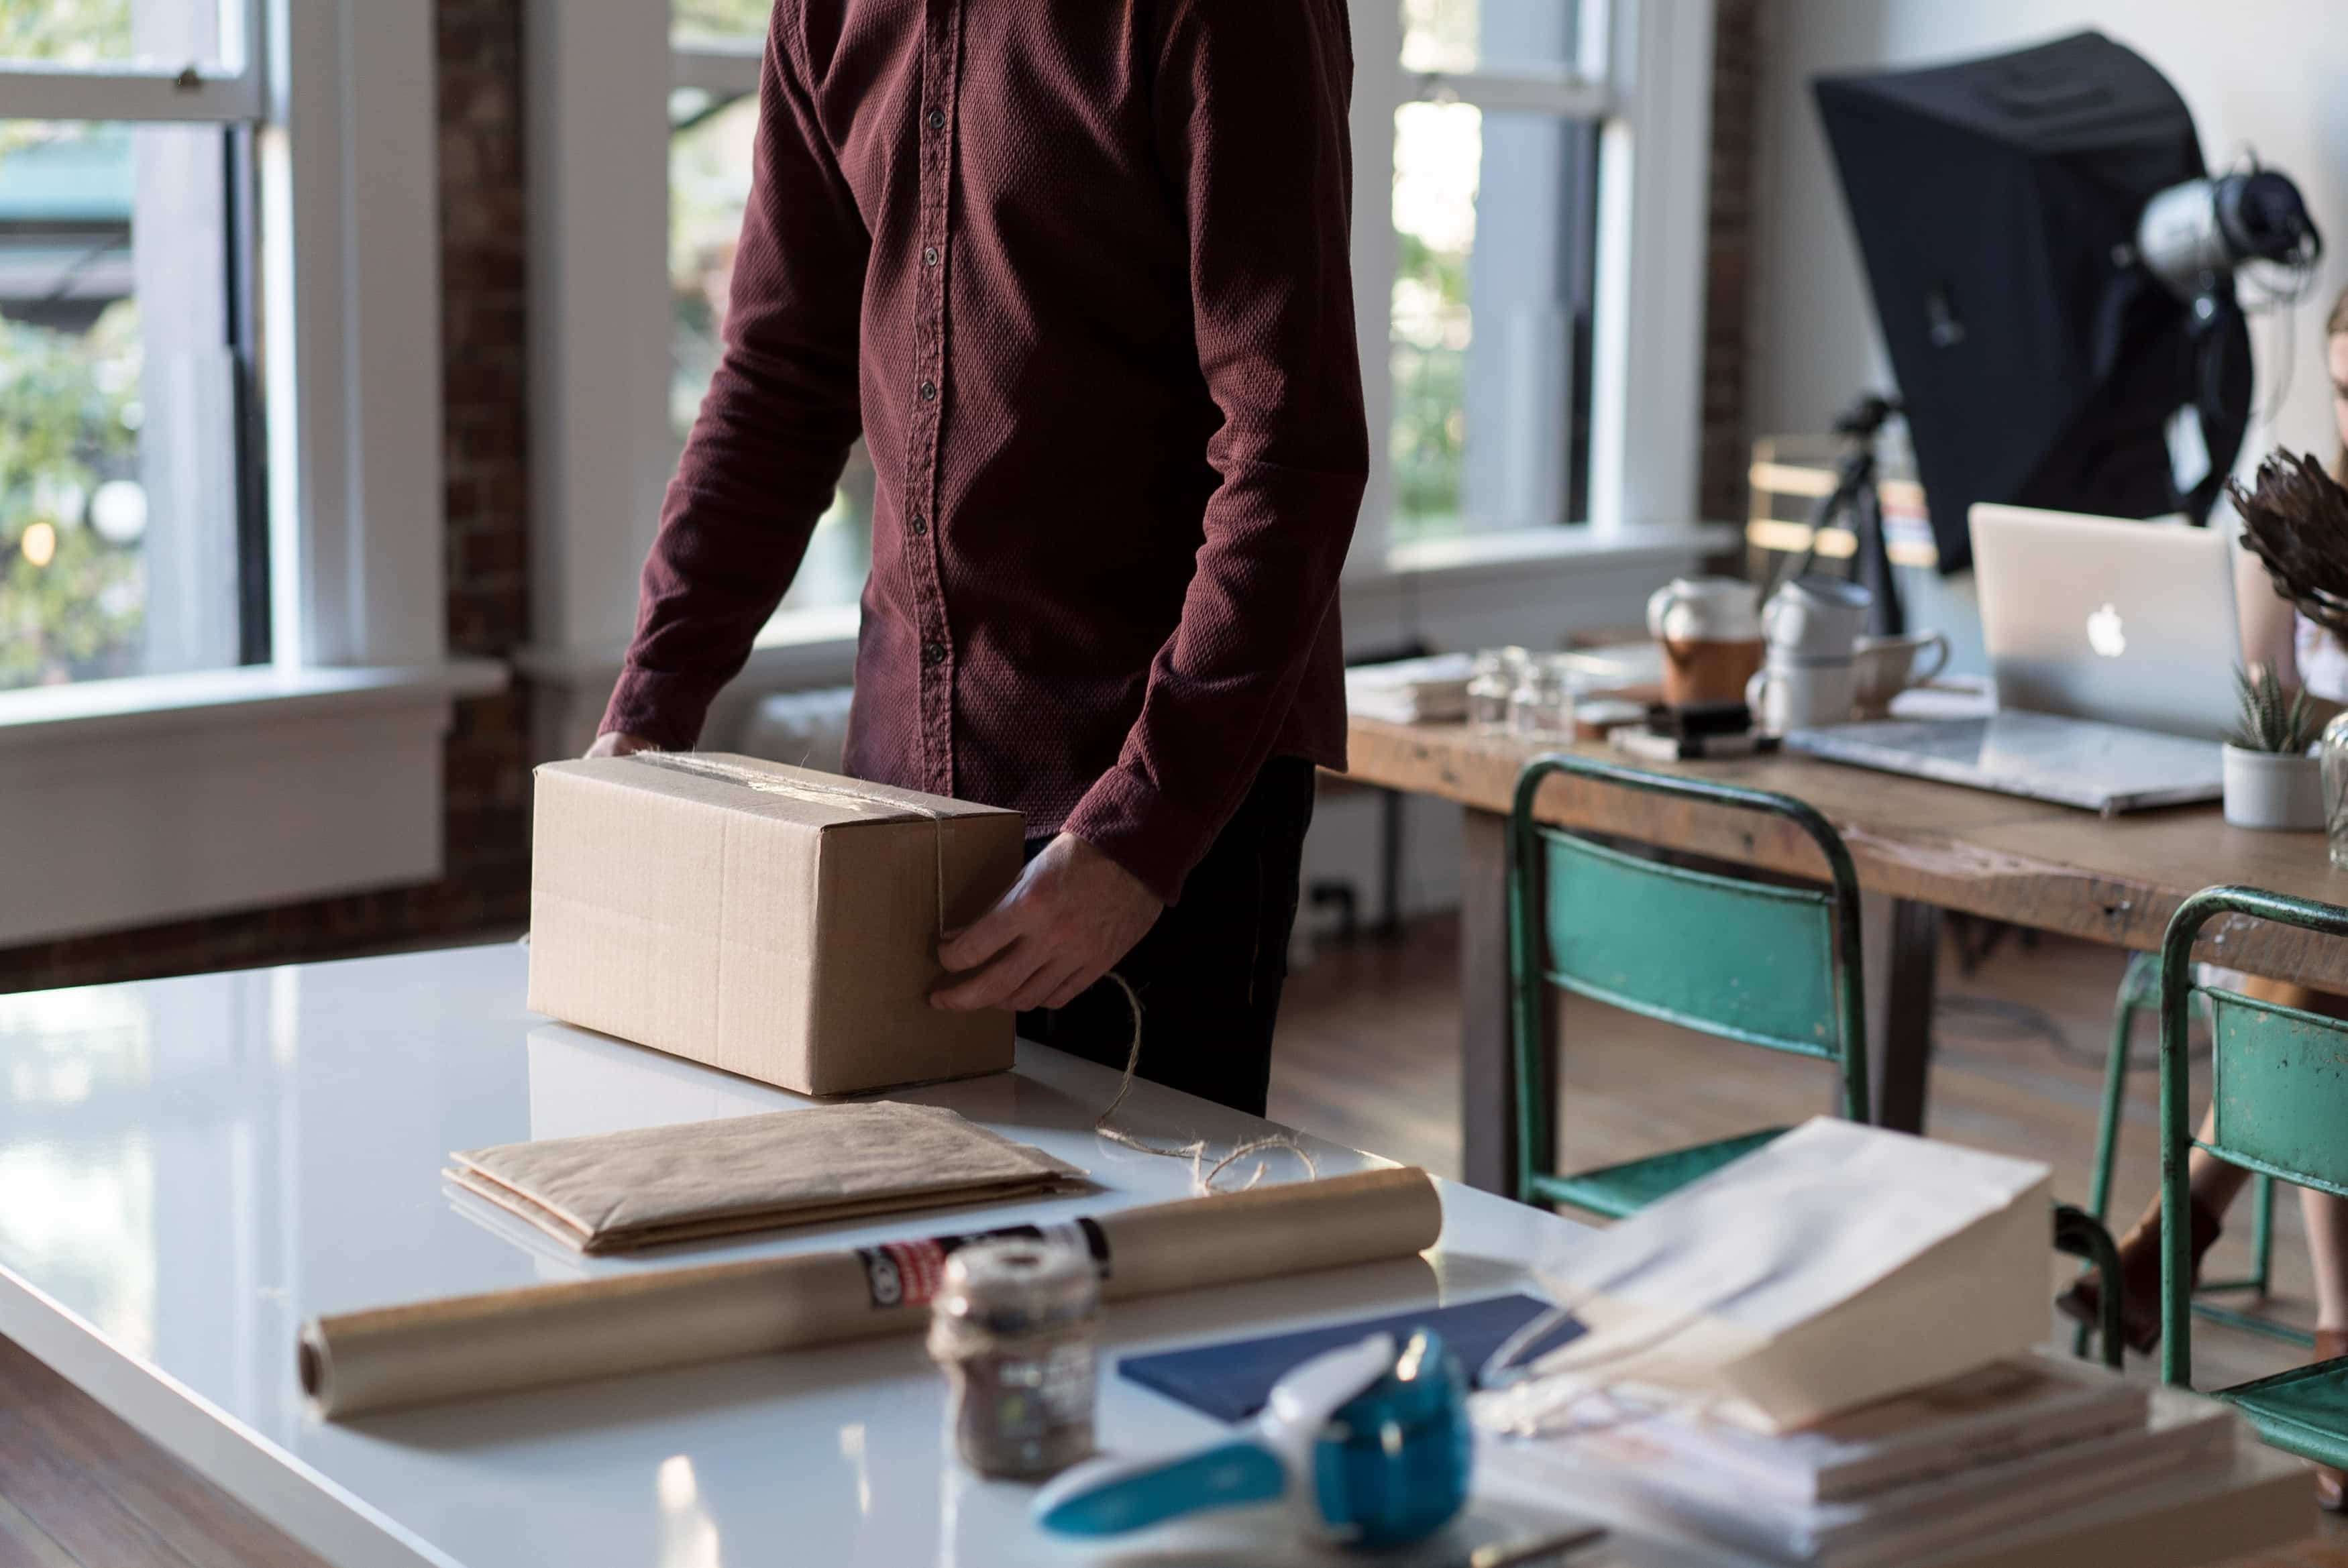 Lower Your Costs To Do Business: 5 Ways SMBs Can Save Money On Shipping Rates